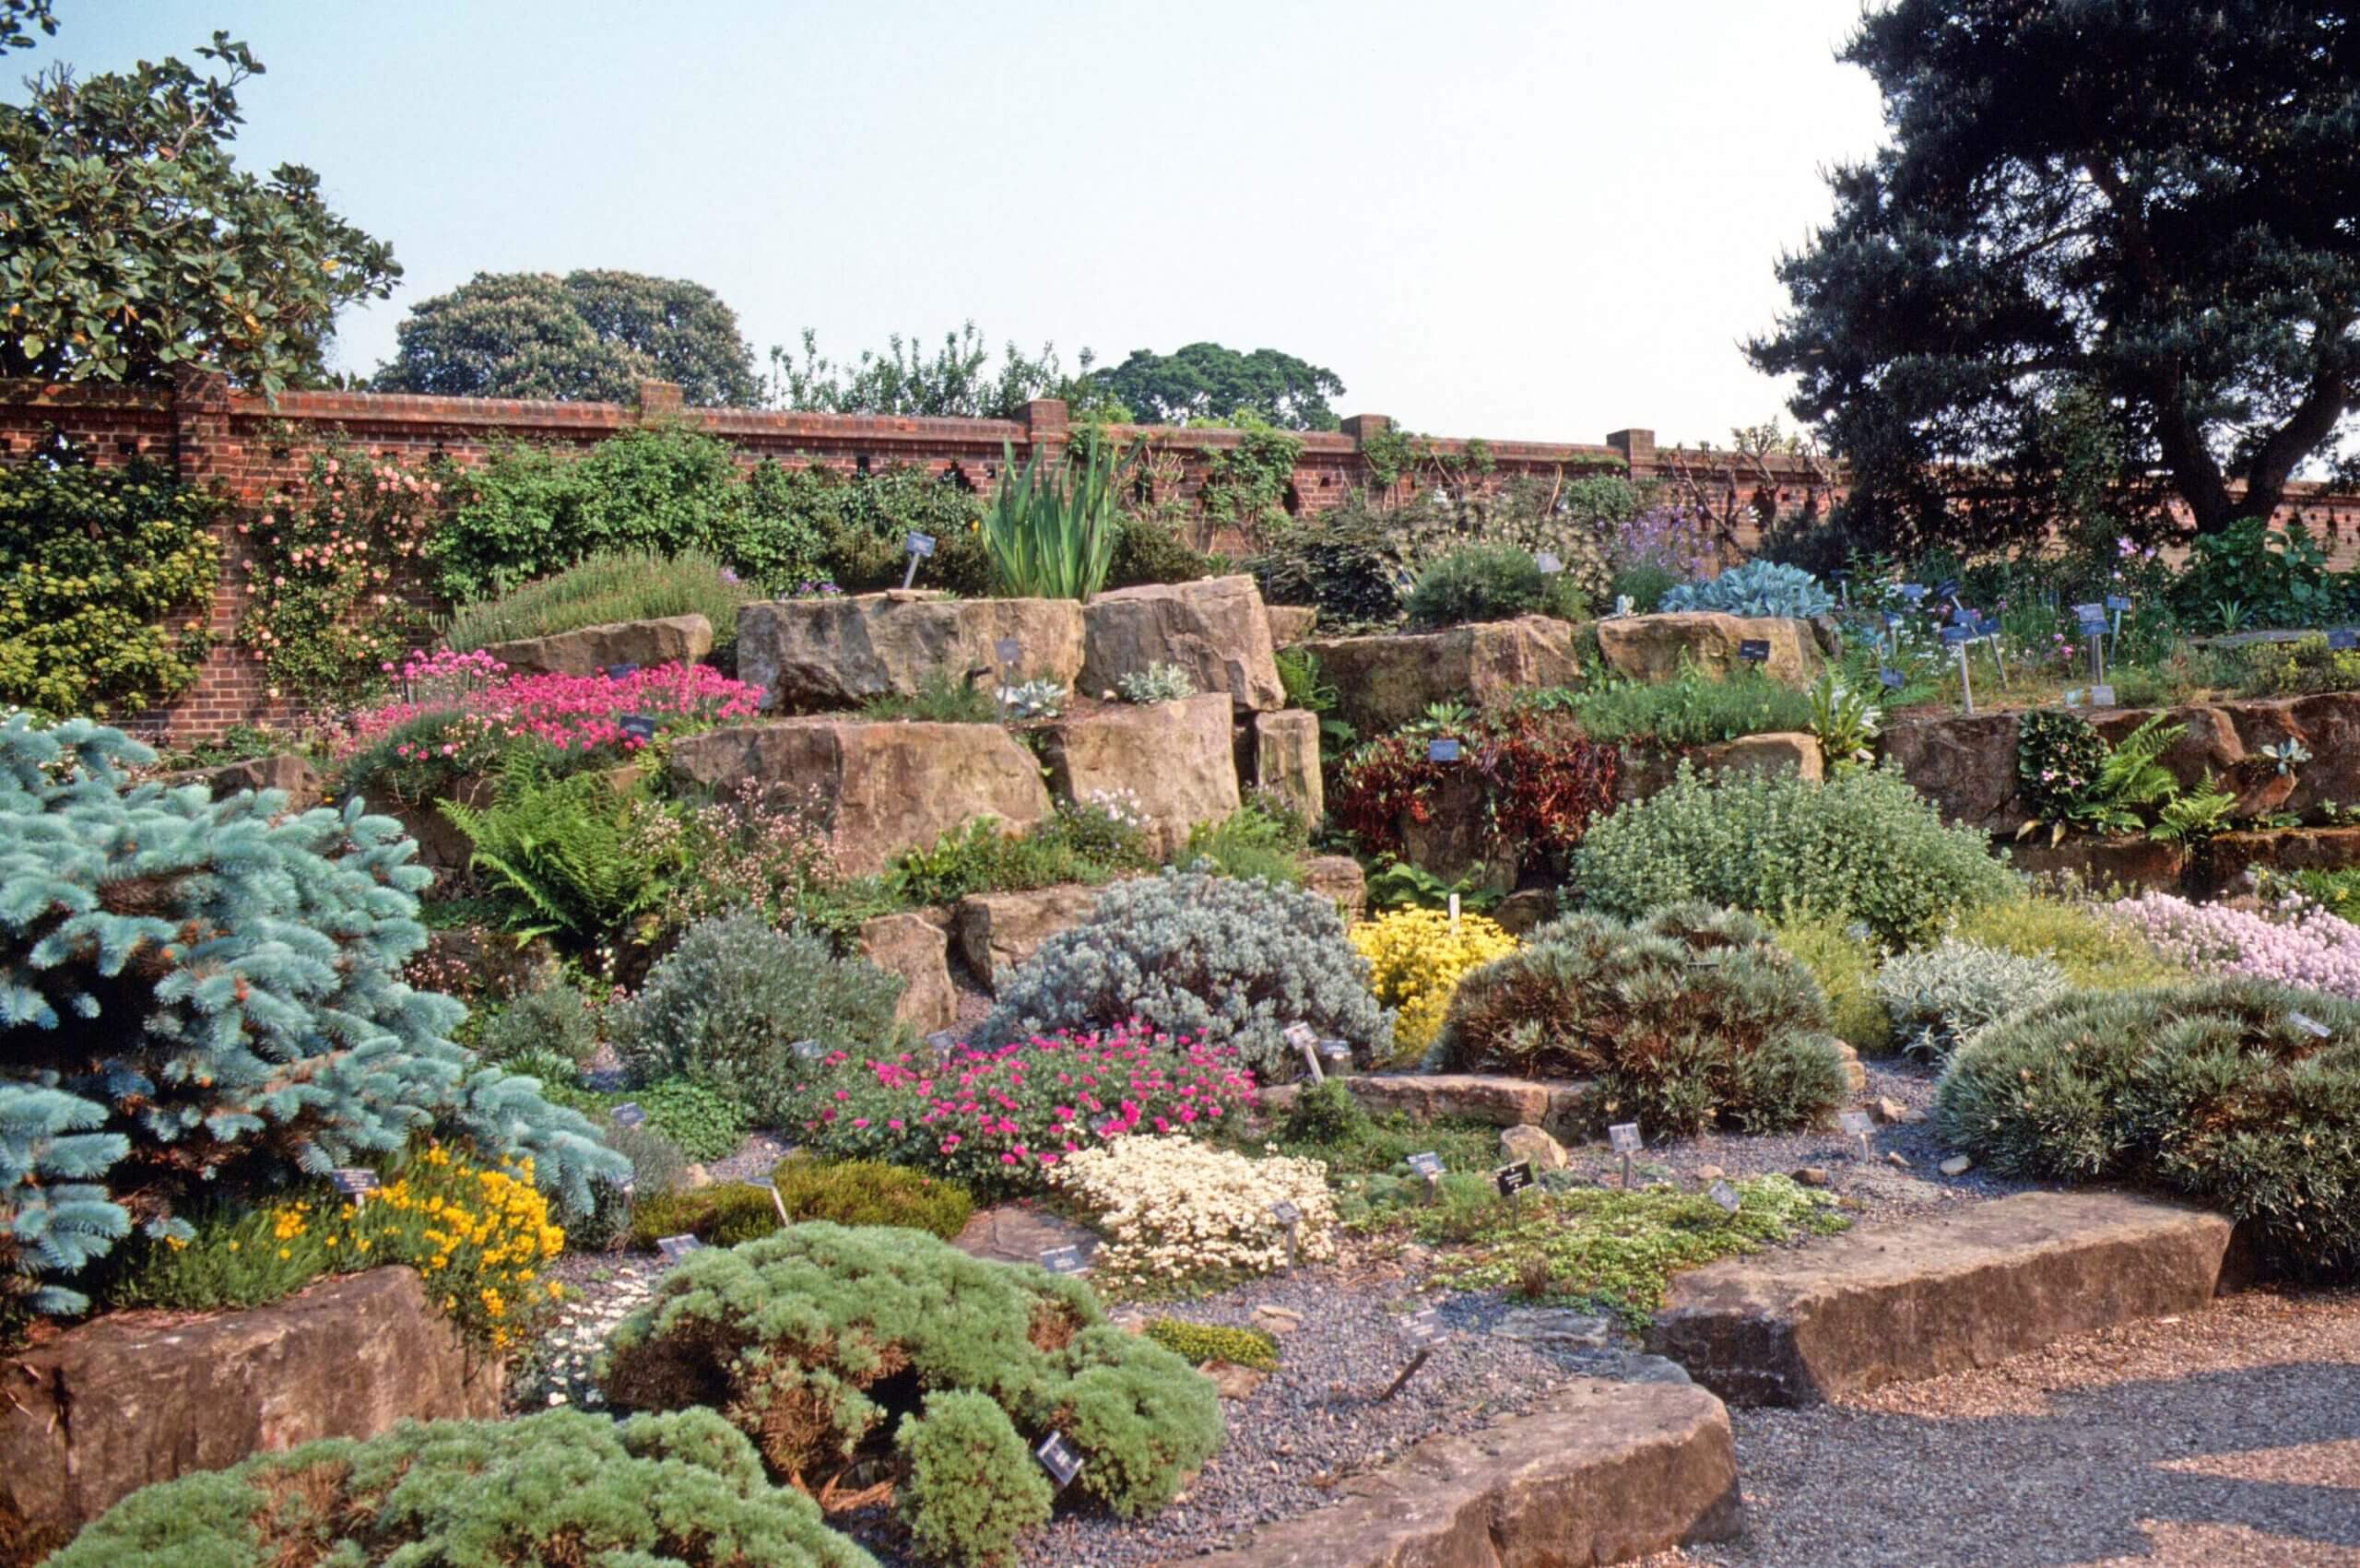 Succulents thrive in the crevices and graveled beds of an English rock garden.